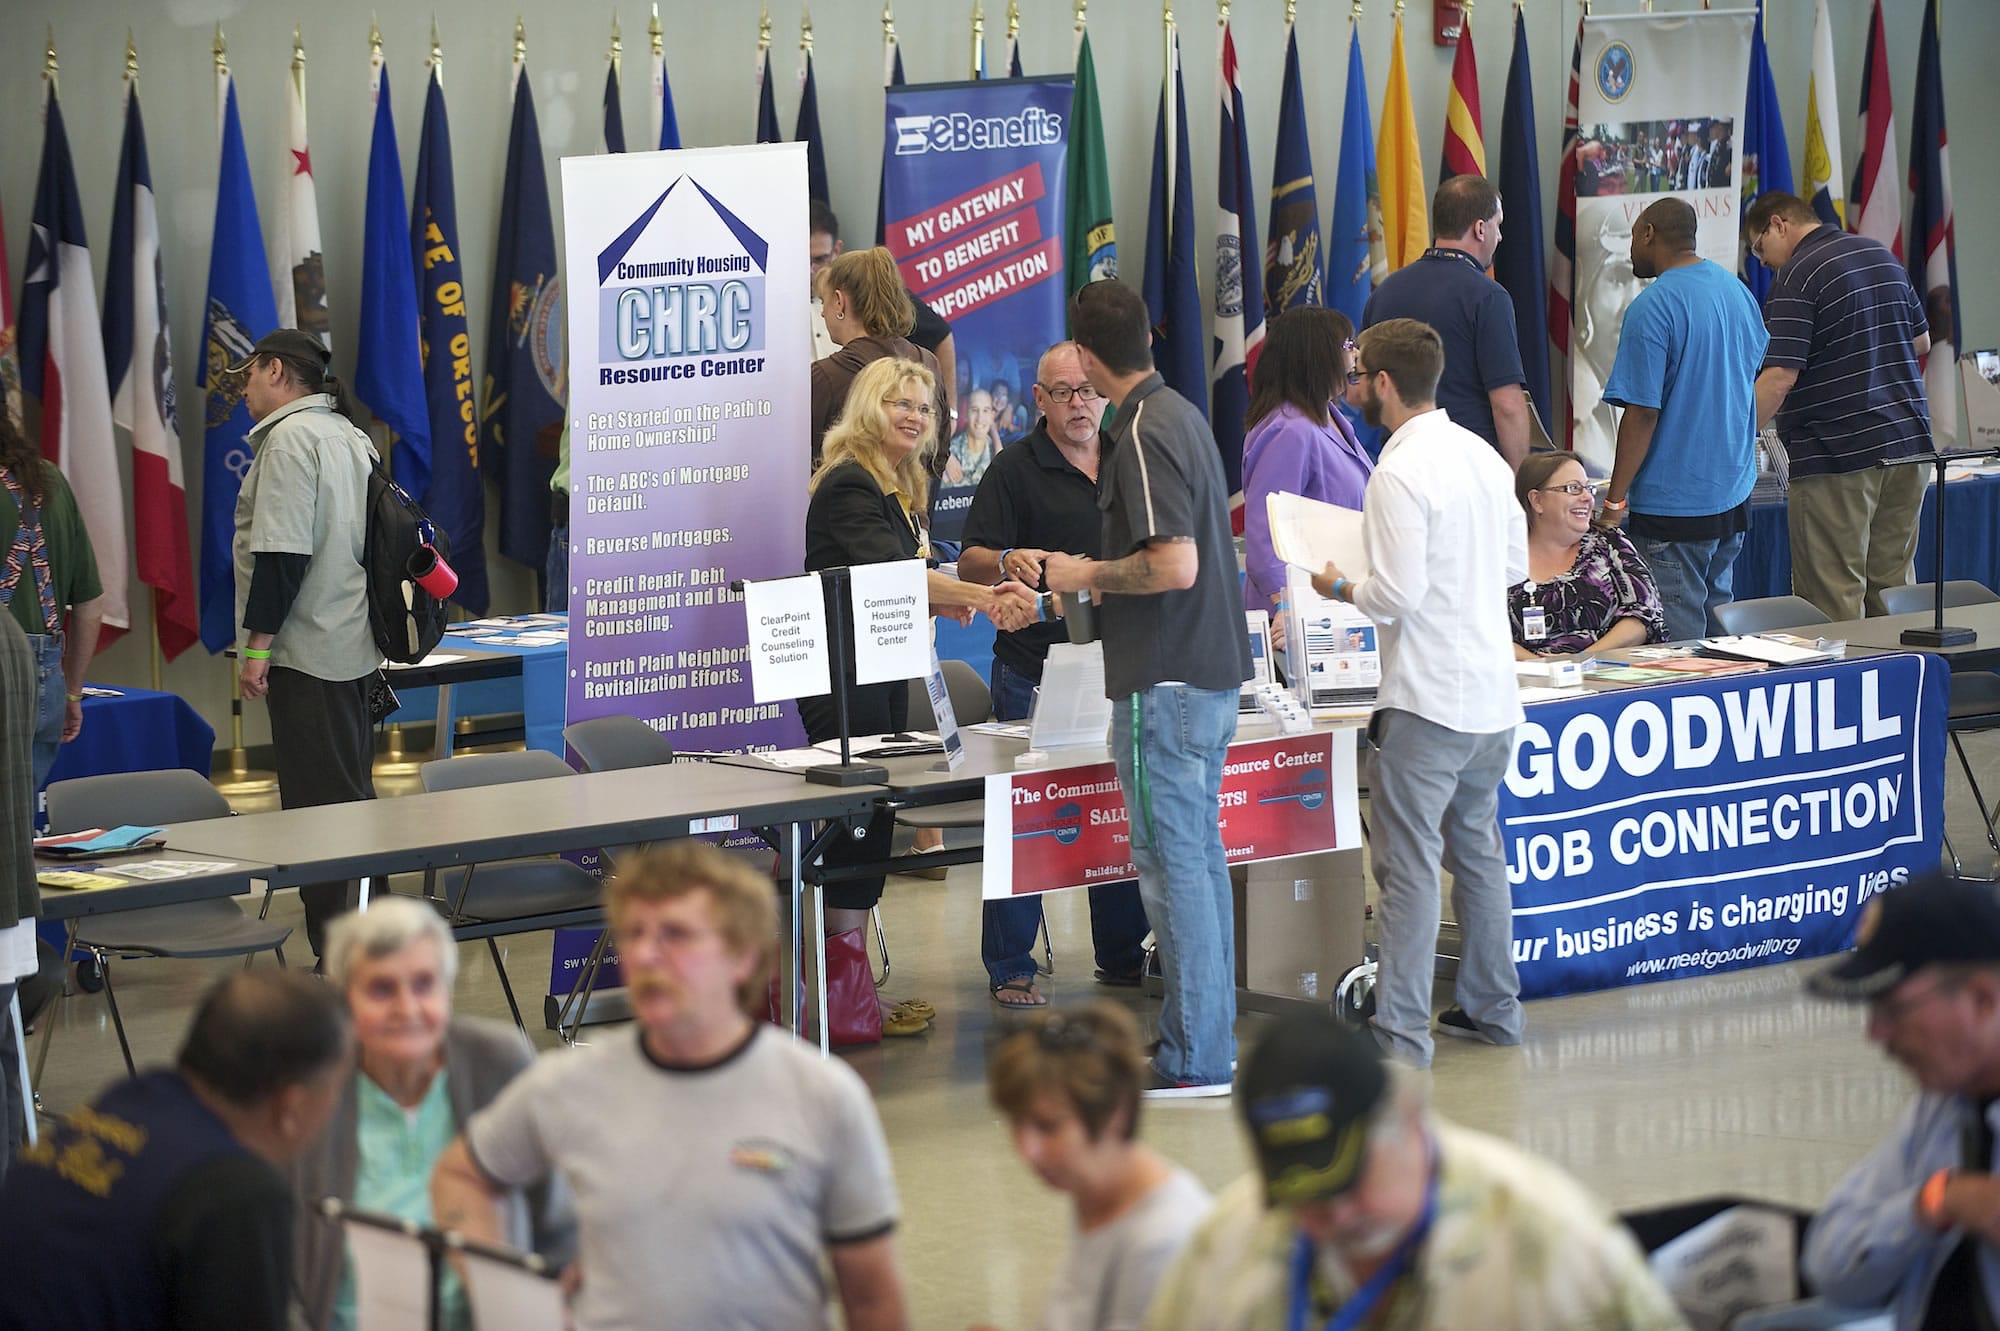 Representatives from more than 30 agencies and organizations were on hand to discuss their services for veterans during Wednesday's stand-down at the Armed Forces Reserve Center in Orchards.